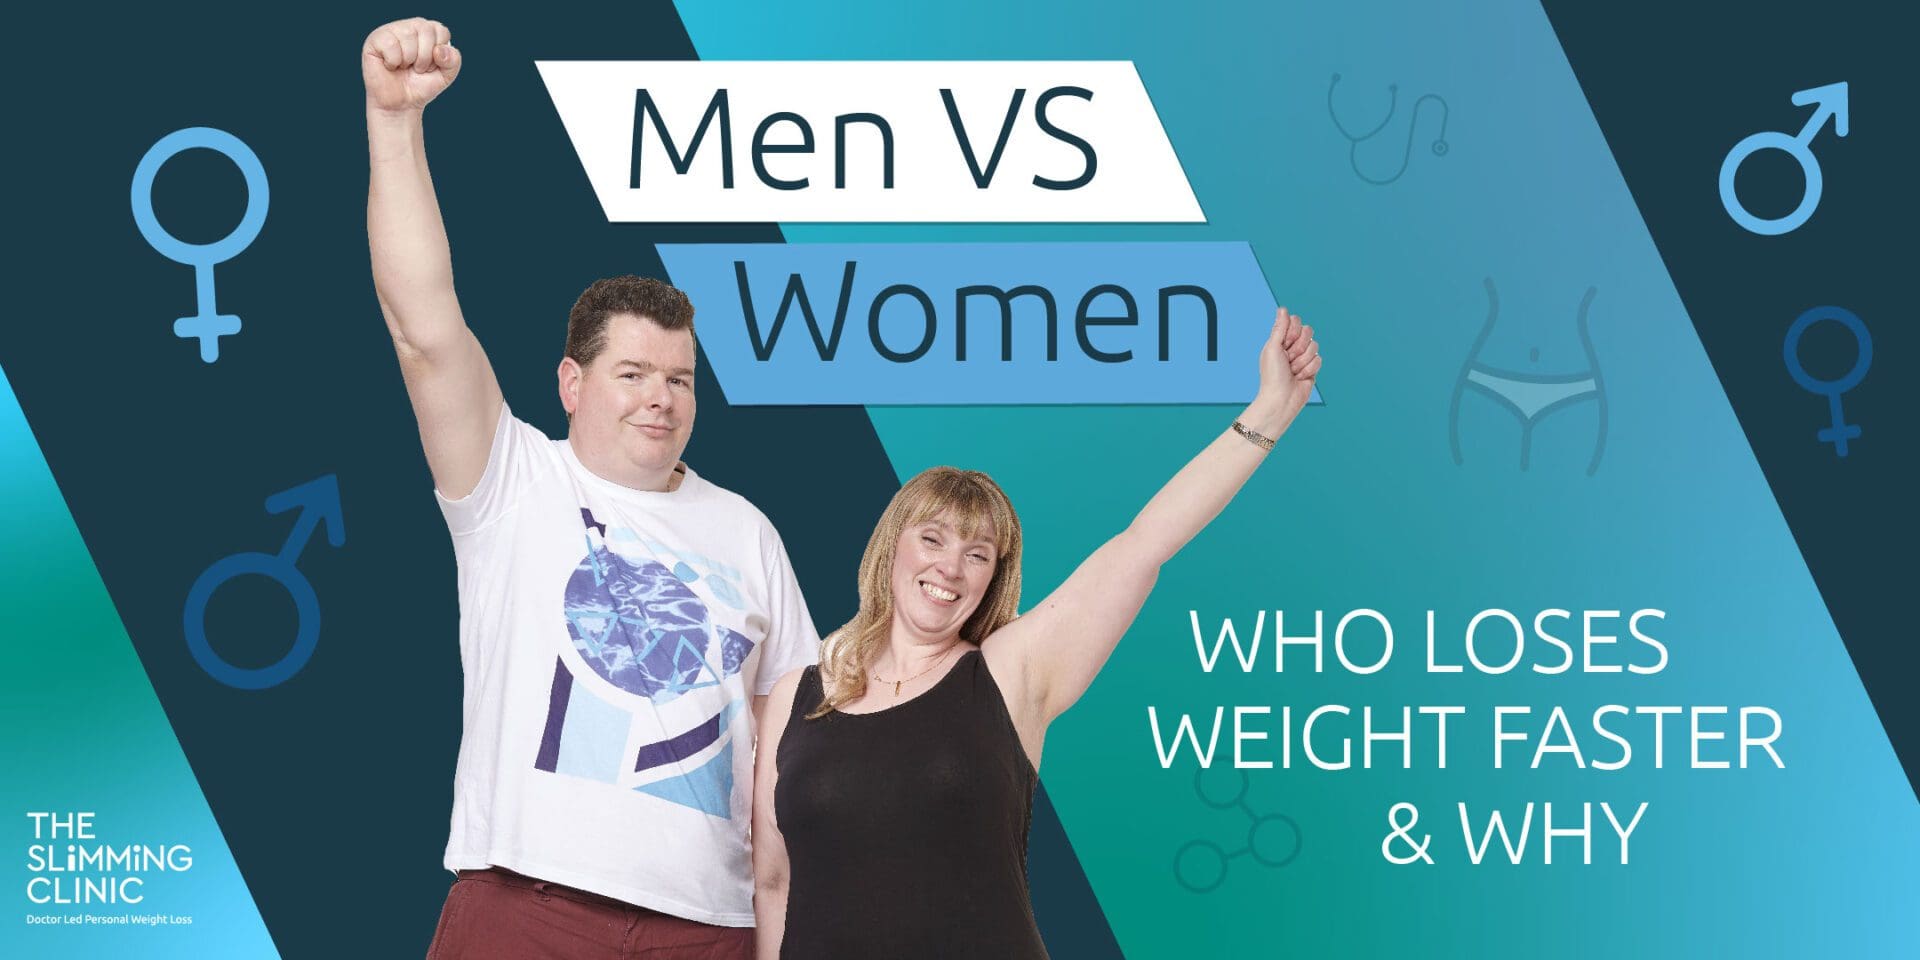 Men vs. Women Weight Loss: Who Loses Weight Faster and Why?